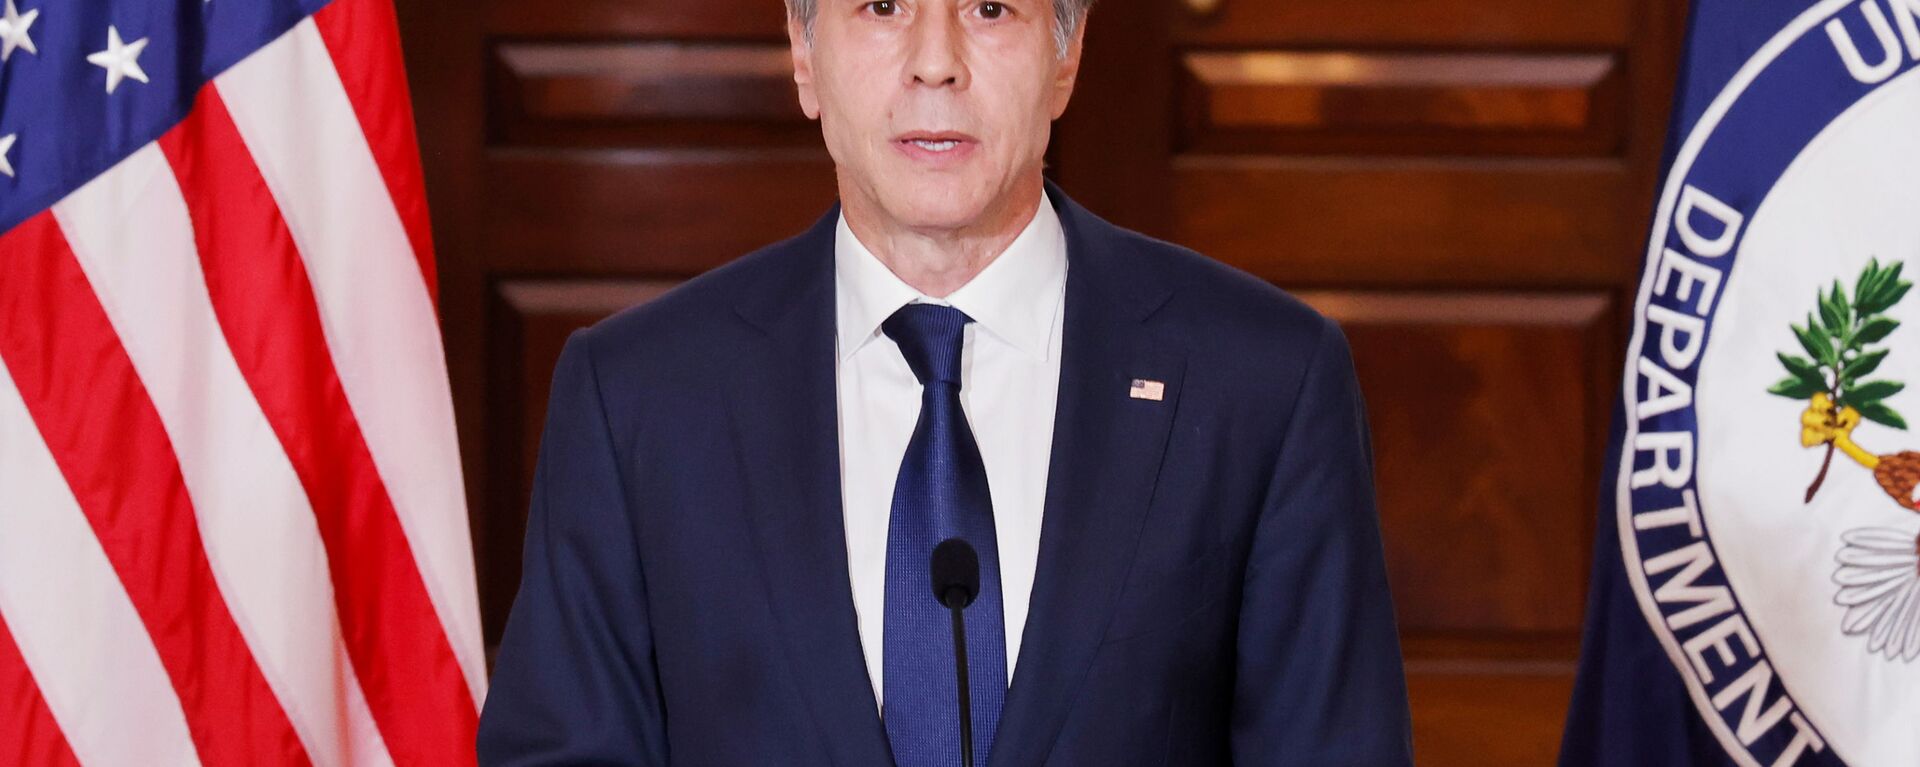 U.S. Secretary of State Antony Blinken delivers remarks following talks on the situation in Afghanistan, at the State Department in Washington, U.S., August 30, 2021 - Sputnik International, 1920, 14.09.2021